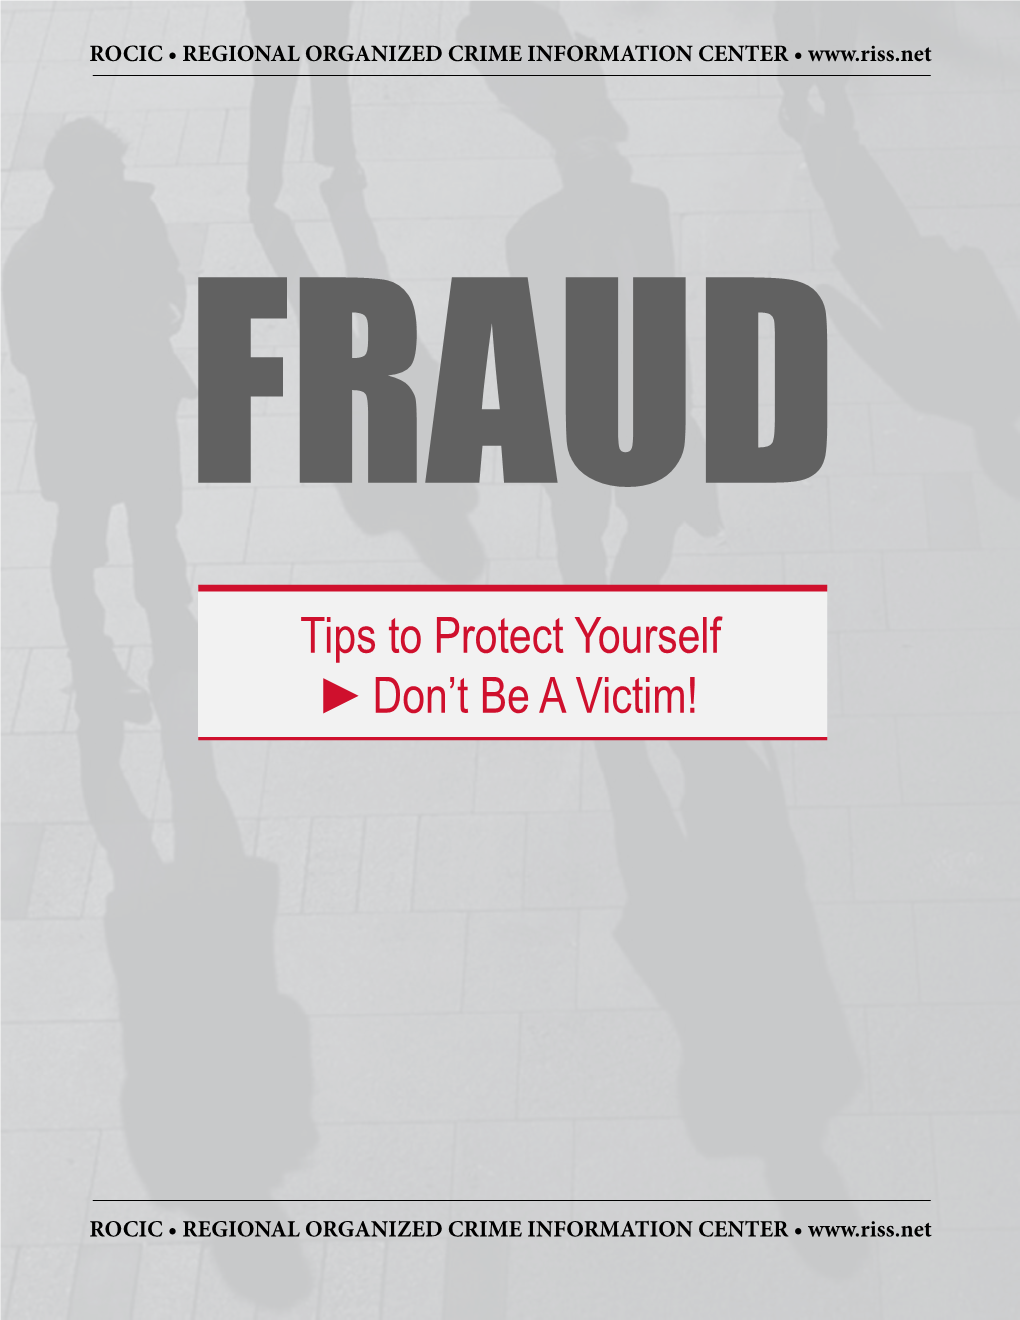 Protect Yourself. Don't Be a Victim of Fraud